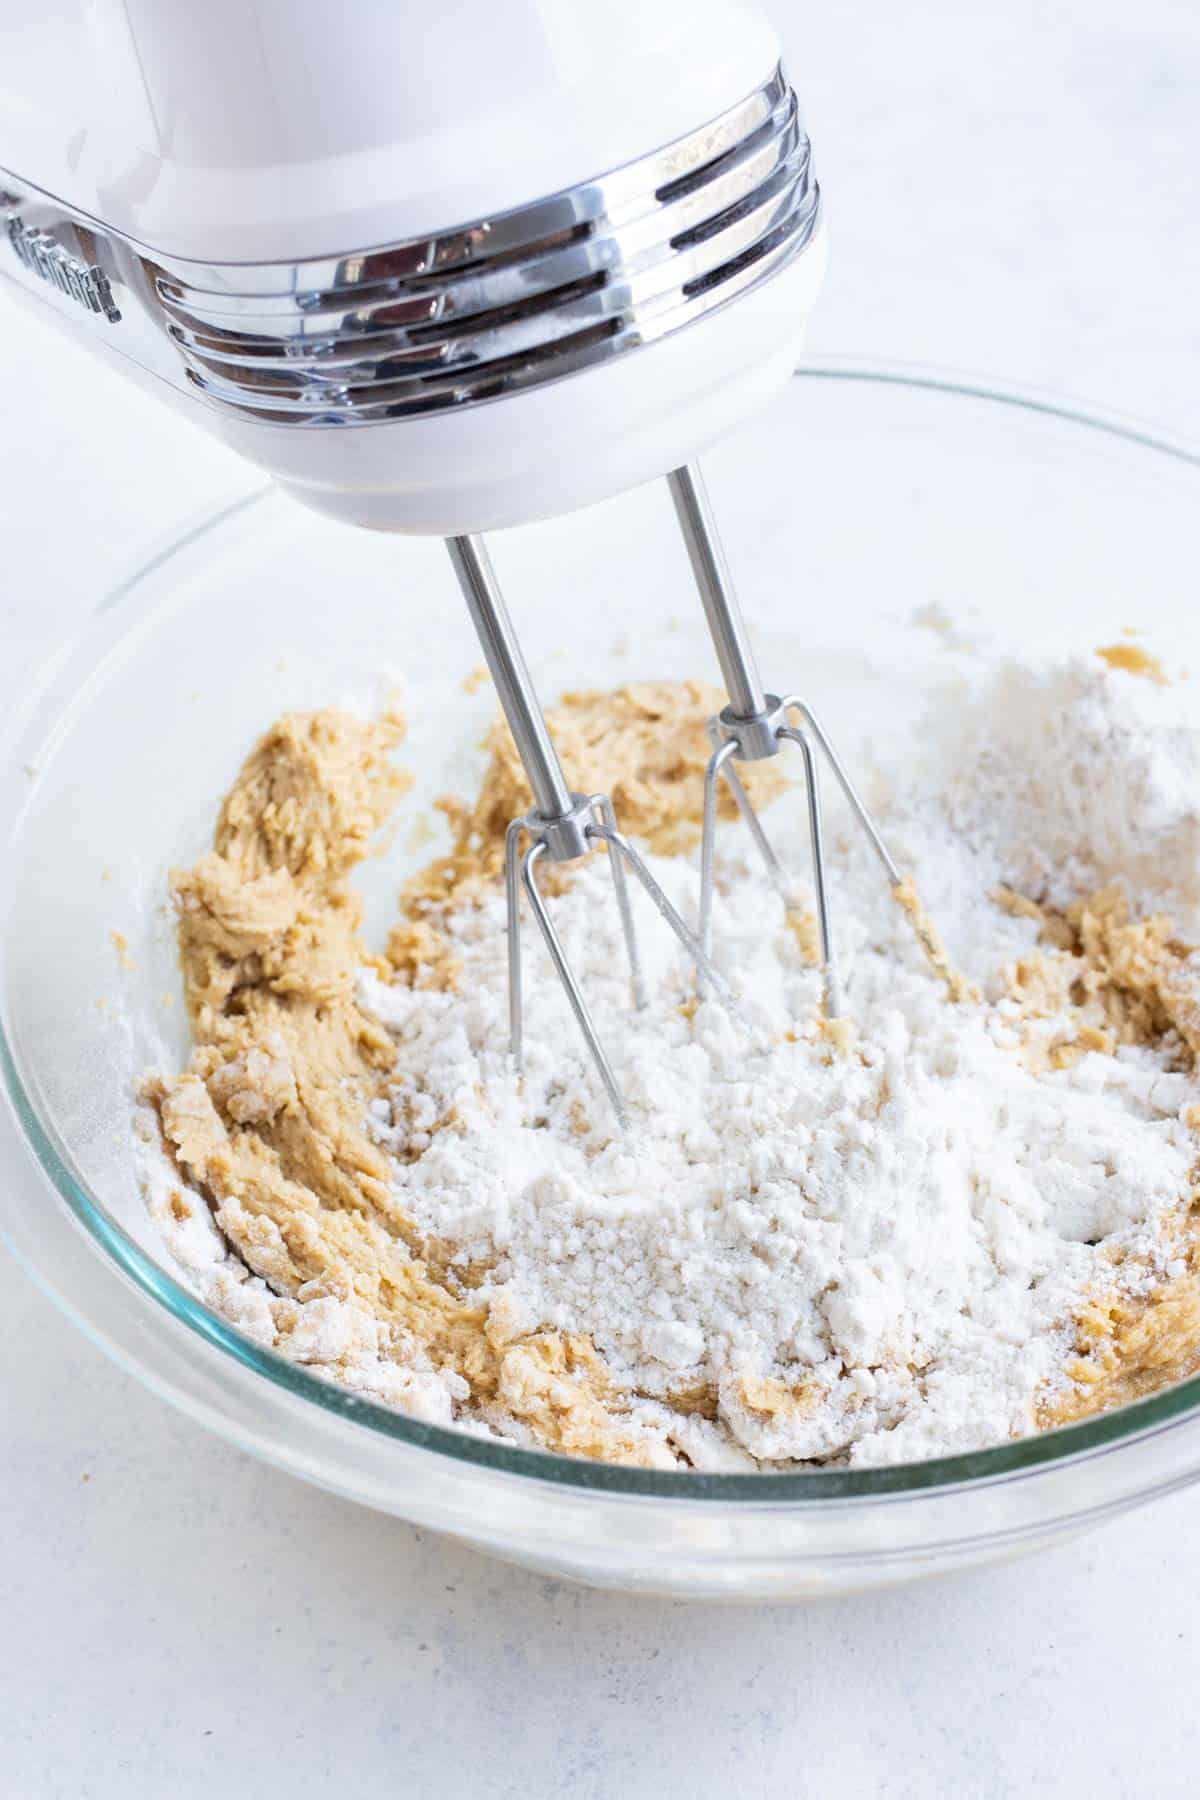 Flour is added into the sugar mixture.